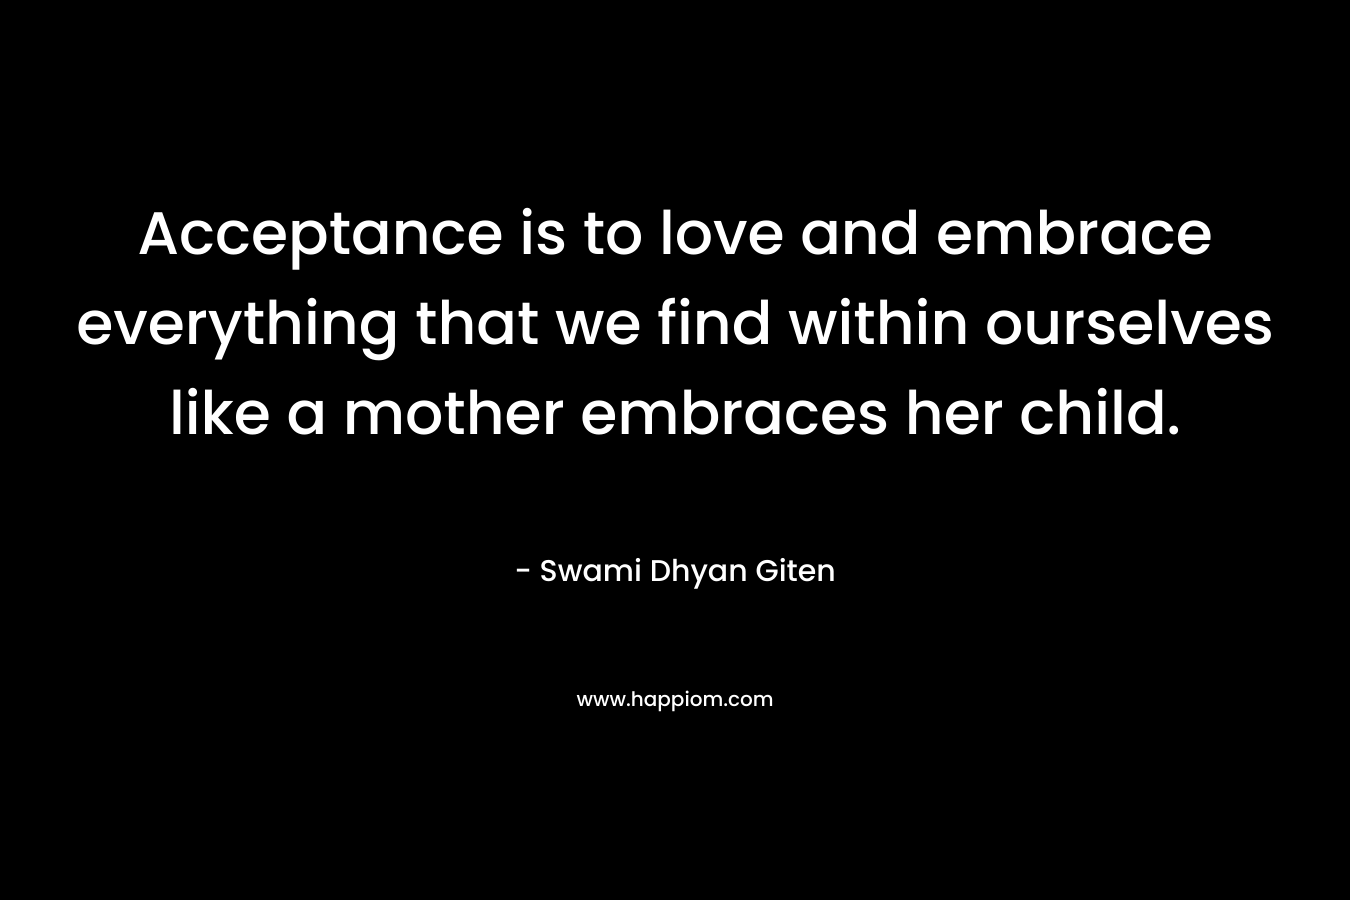 Acceptance is to love and embrace everything that we find within ourselves like a mother embraces her child.